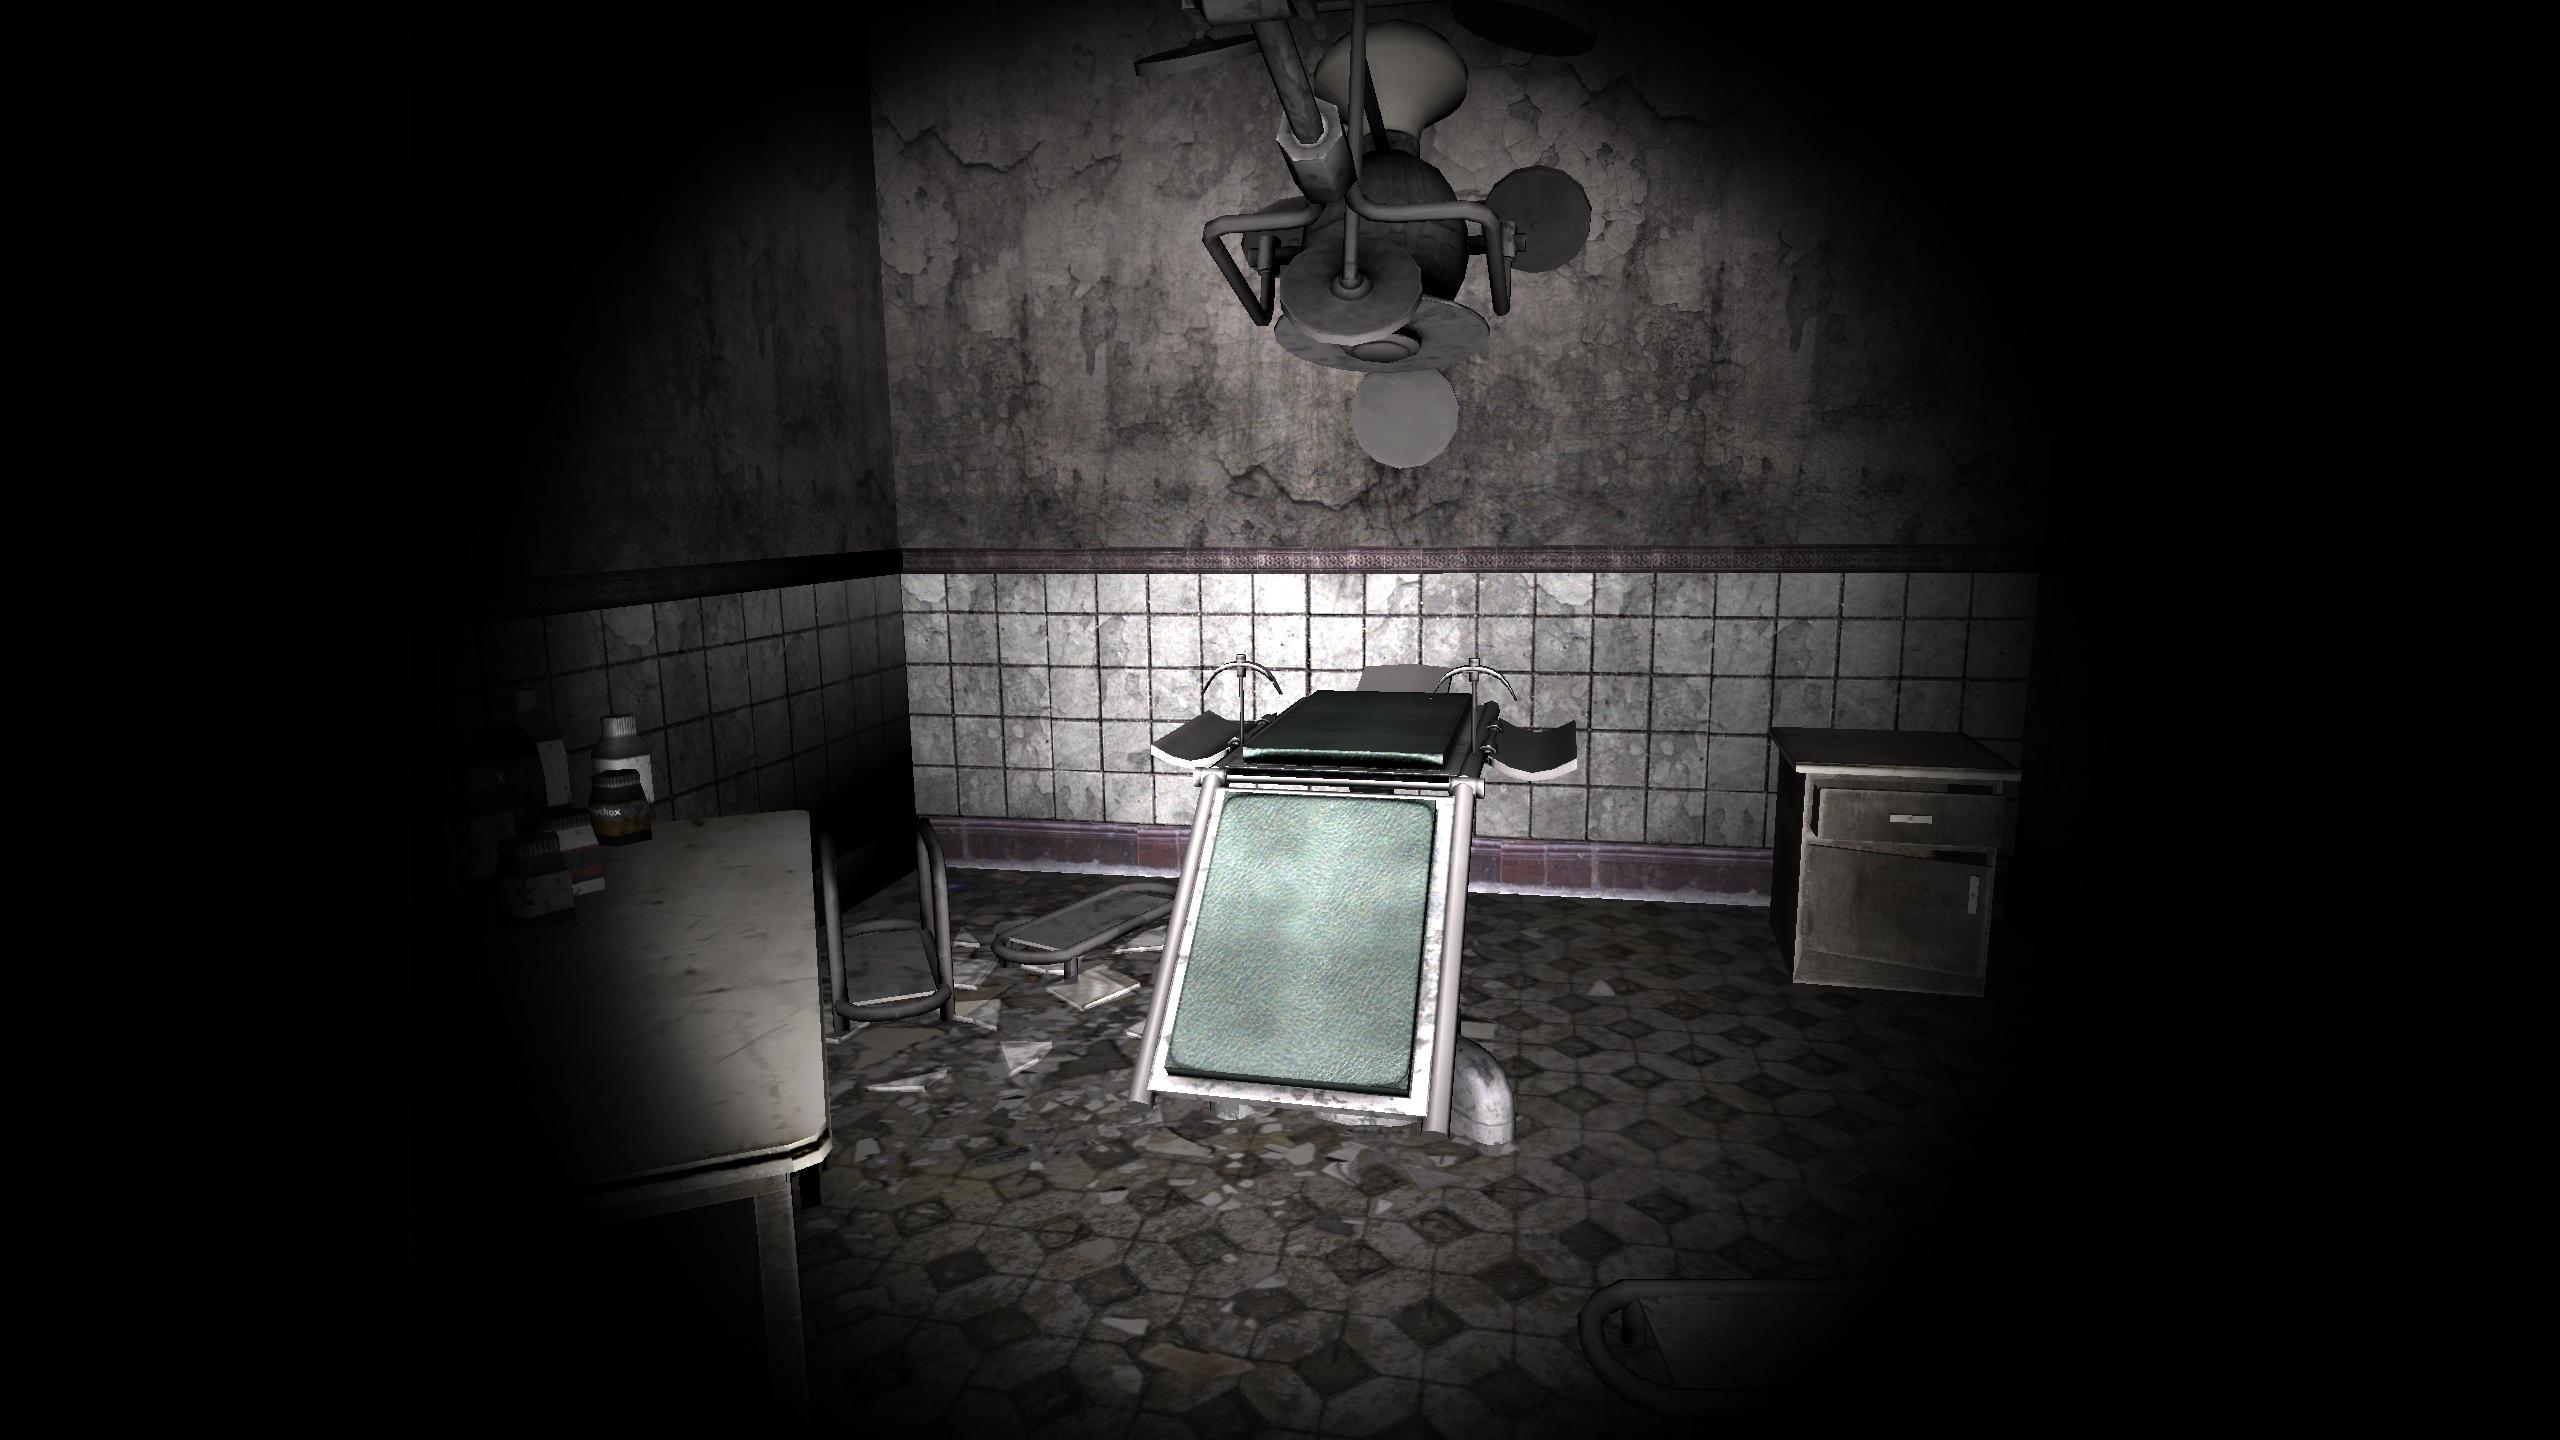 Link tải game The Ghost - Survival Horror - File APK cho PC, Android, iPhone